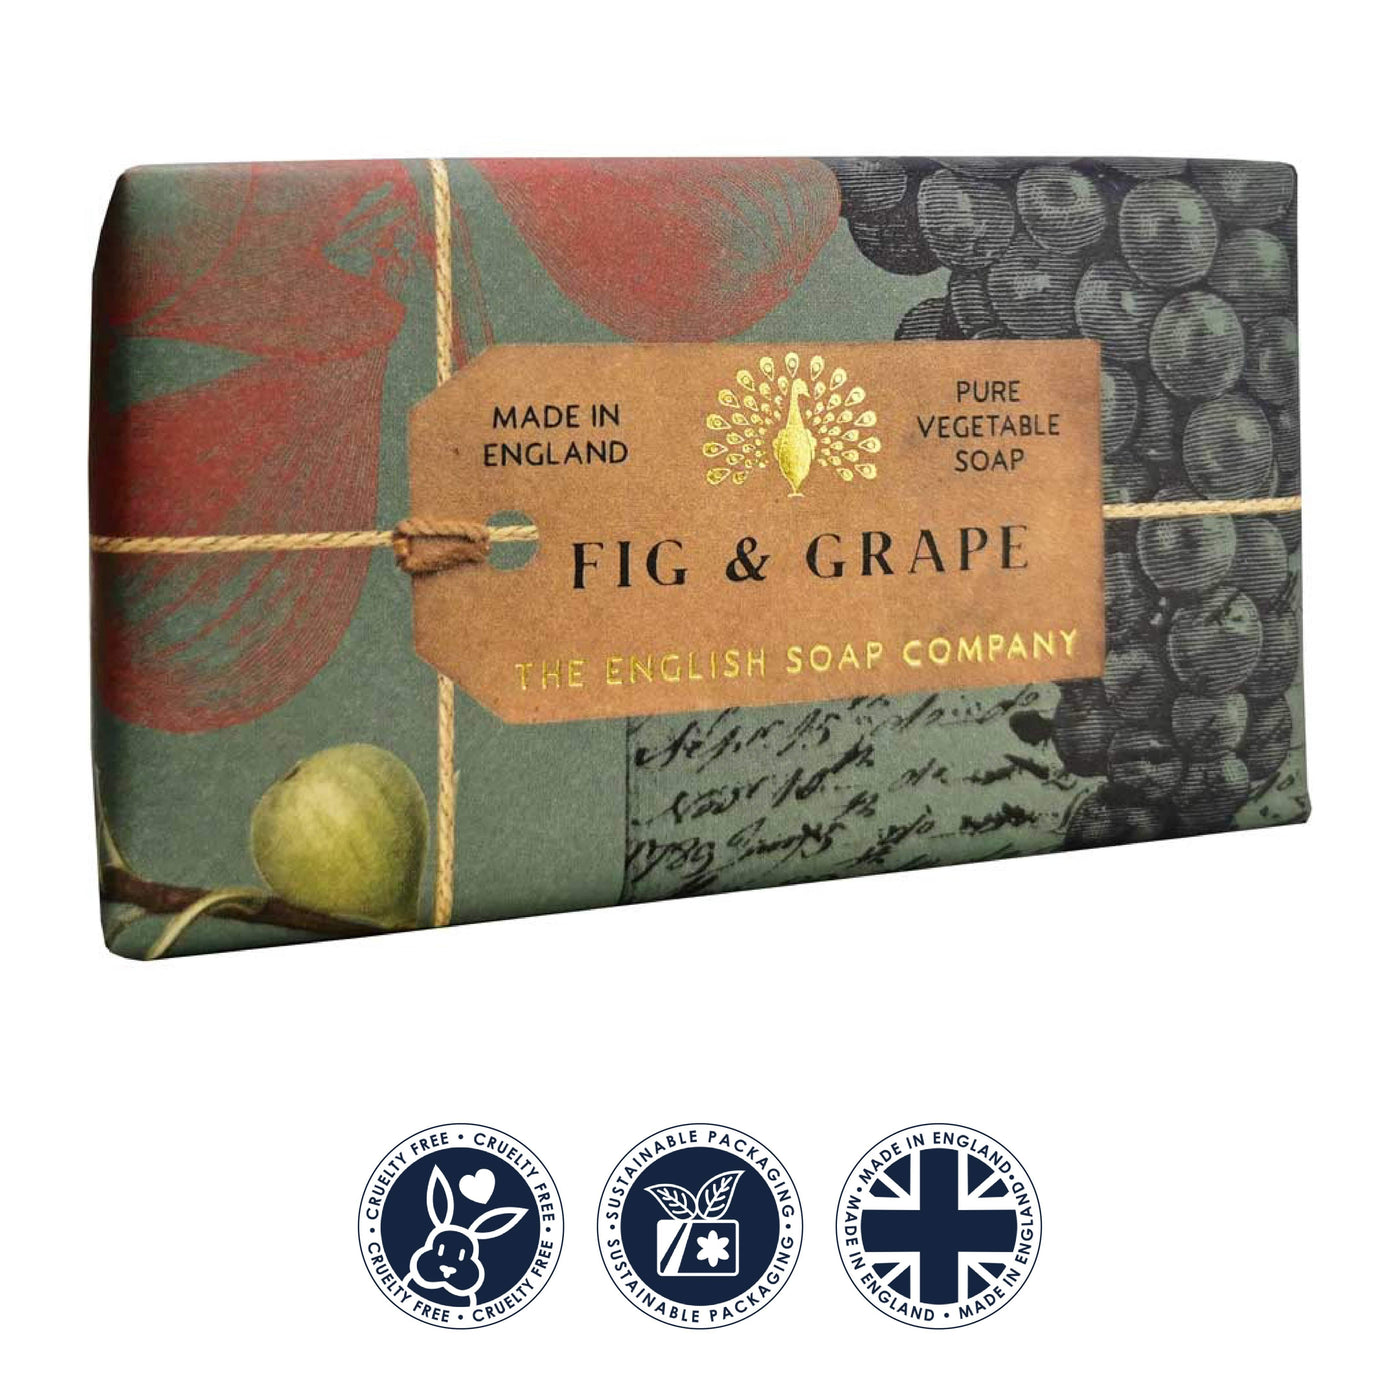 Anniversary Fig & Grape Soap Bar from our Luxury Bar Soap collection by The English Soap Company